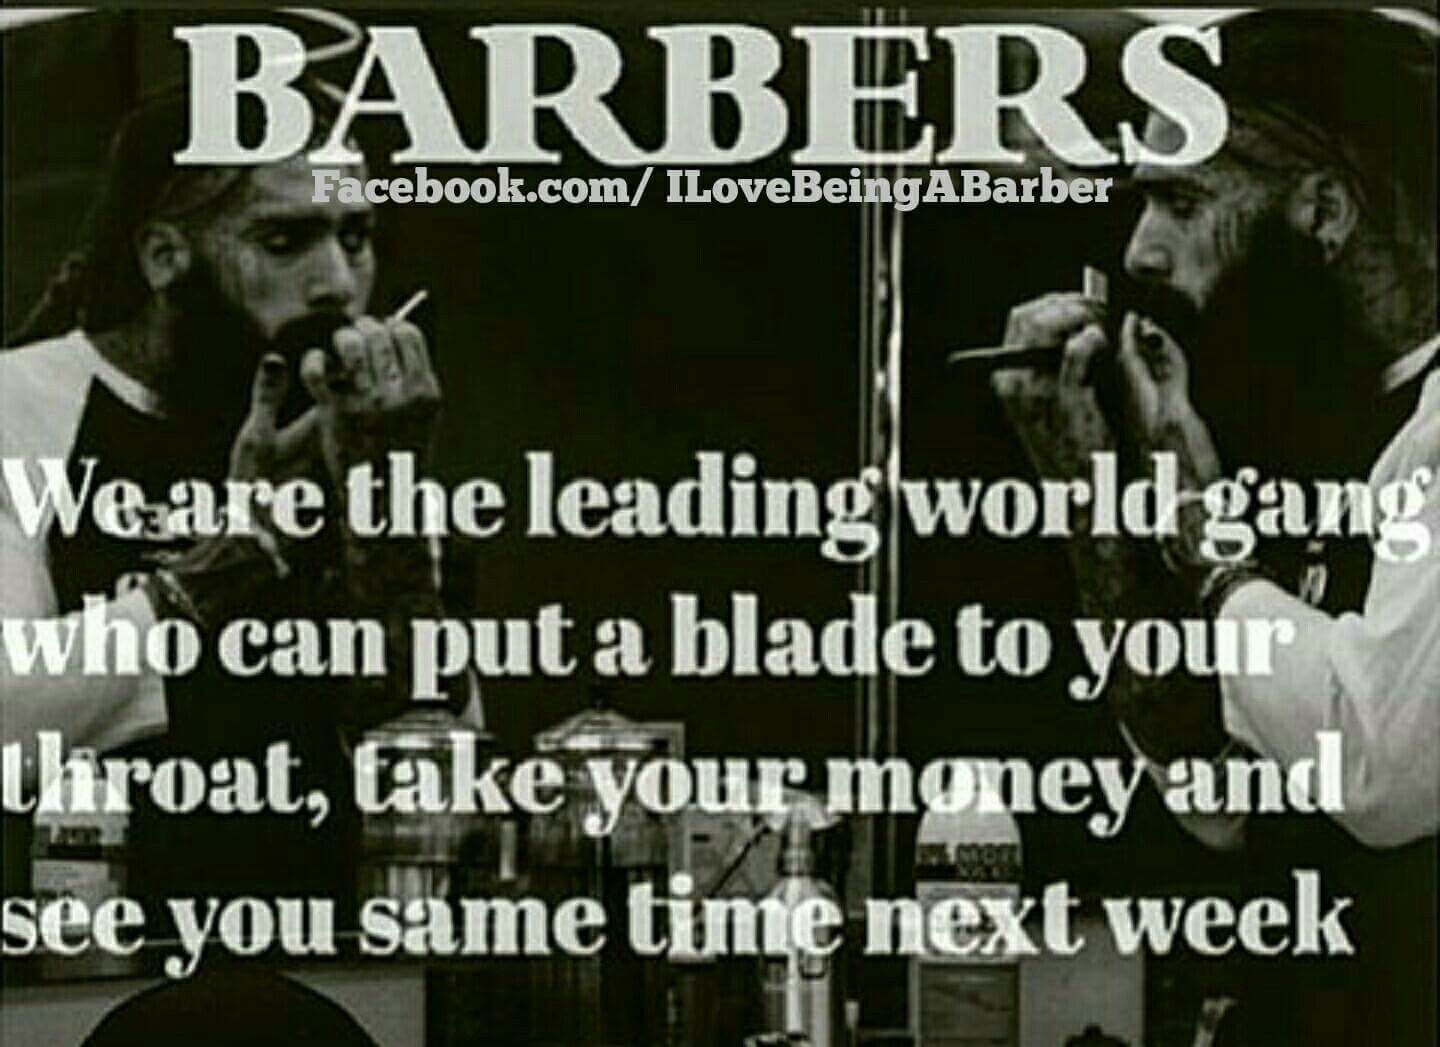 What to say to a barber